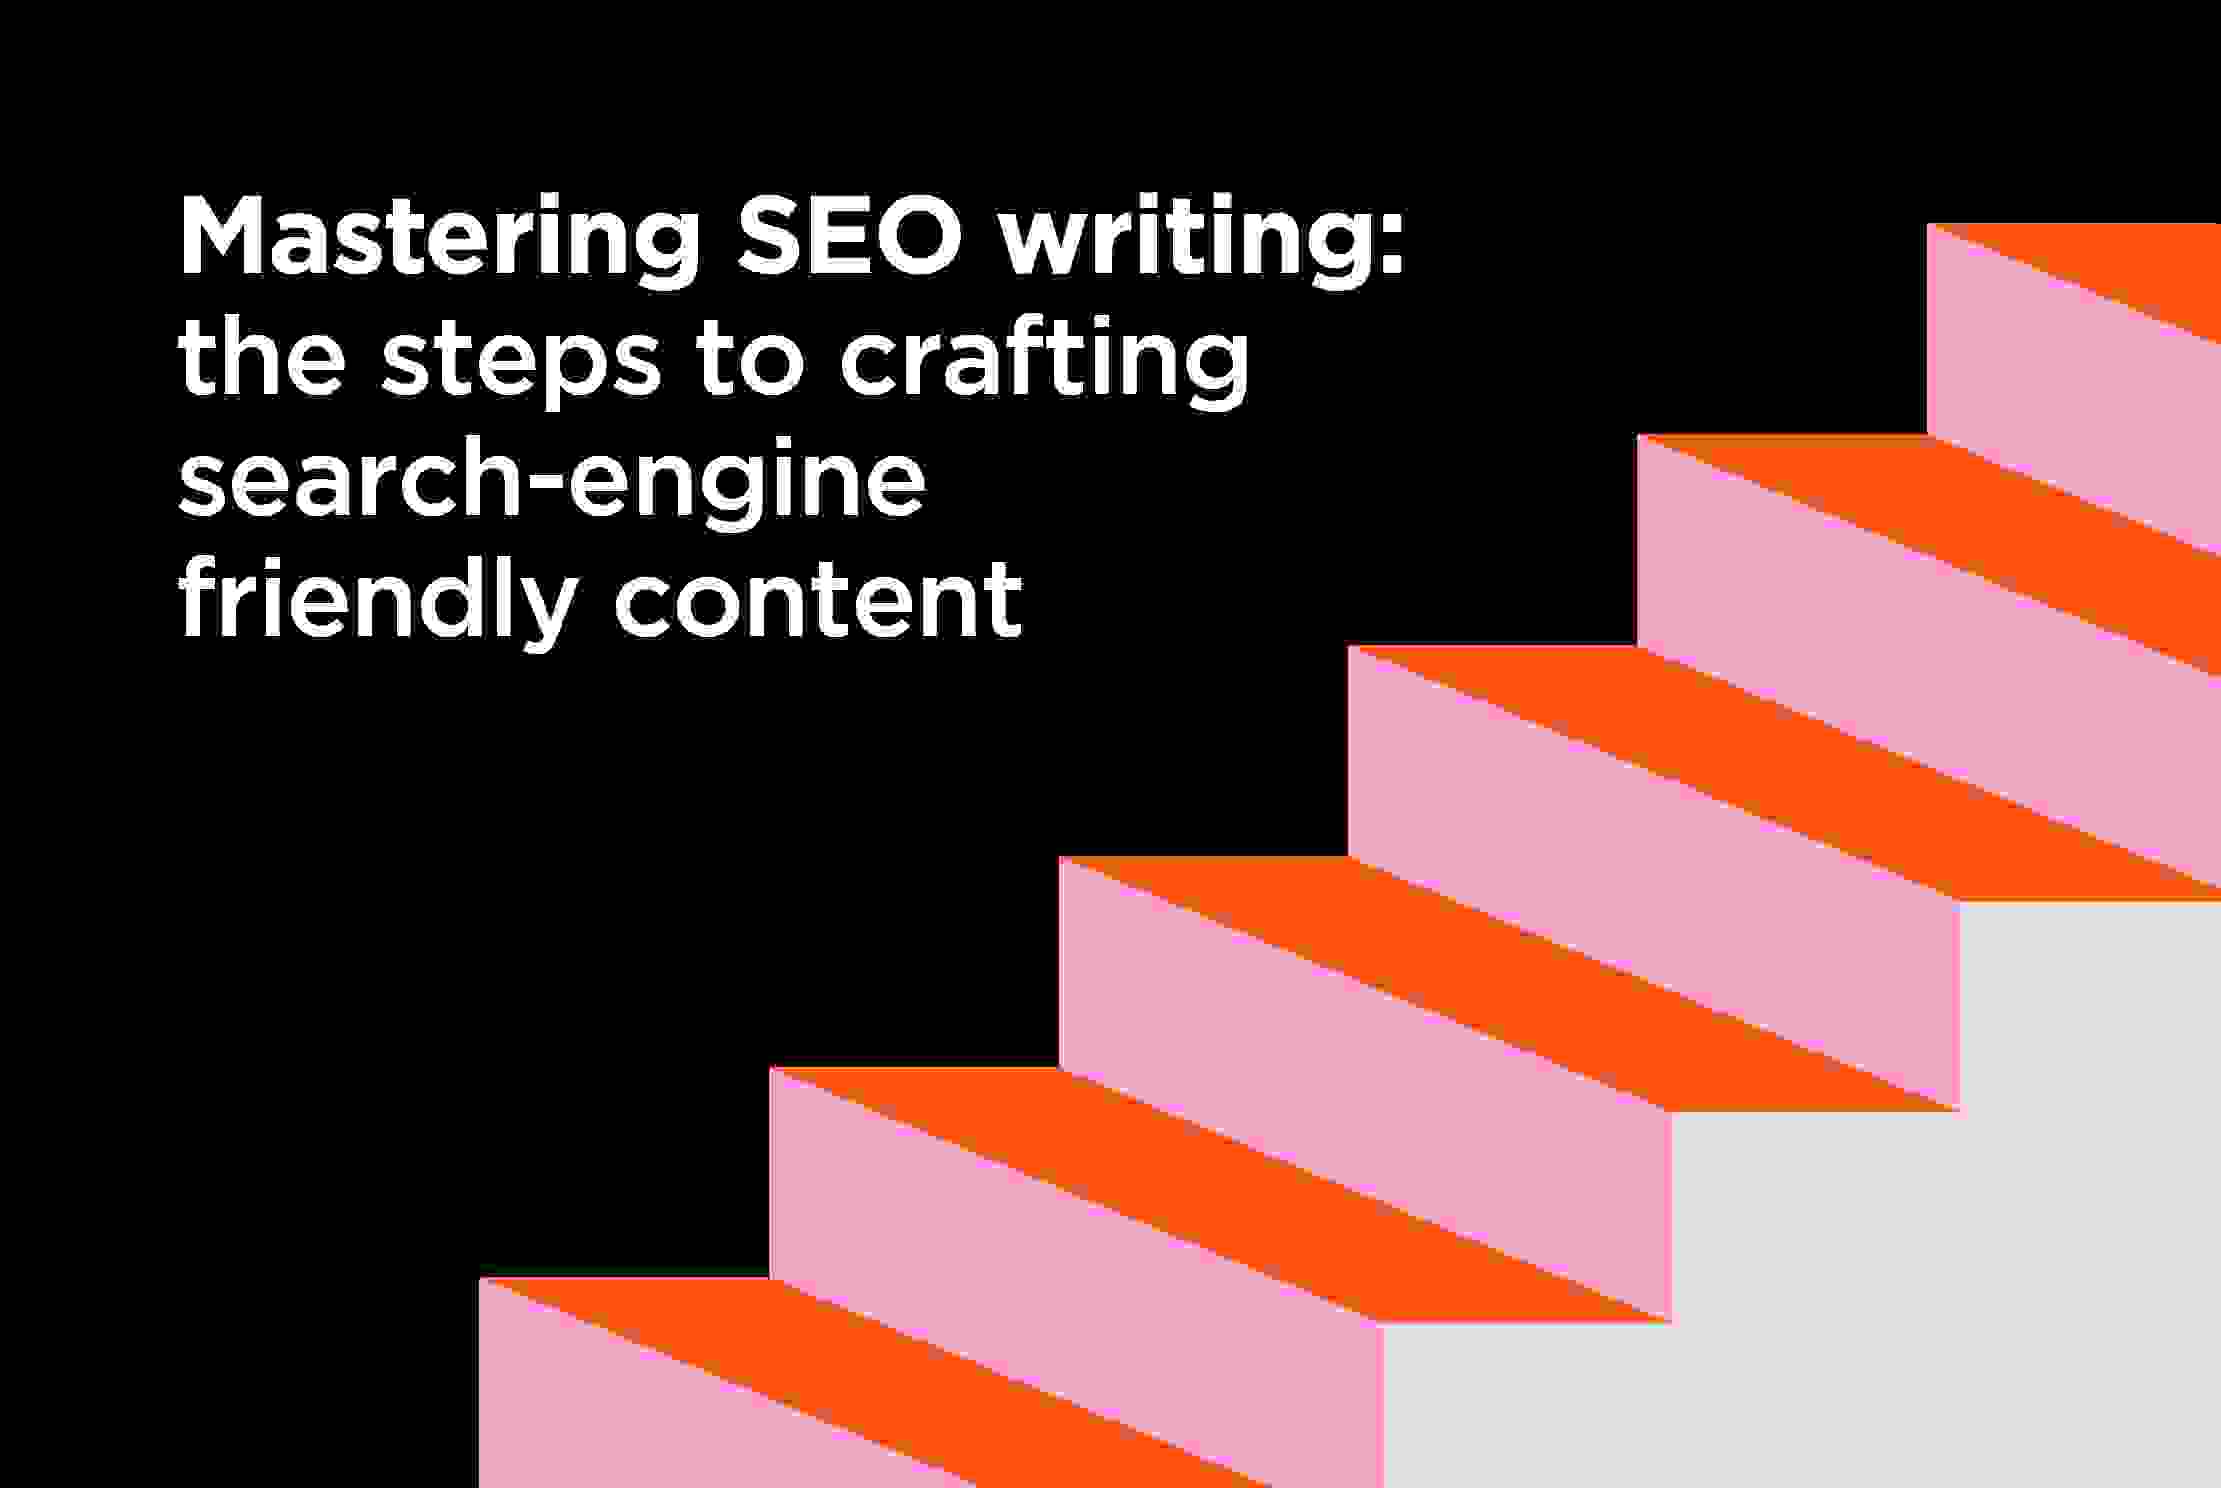 An image of the the title with some steps, Mastering SEO writing: The steps to crafting search-engine friendly content